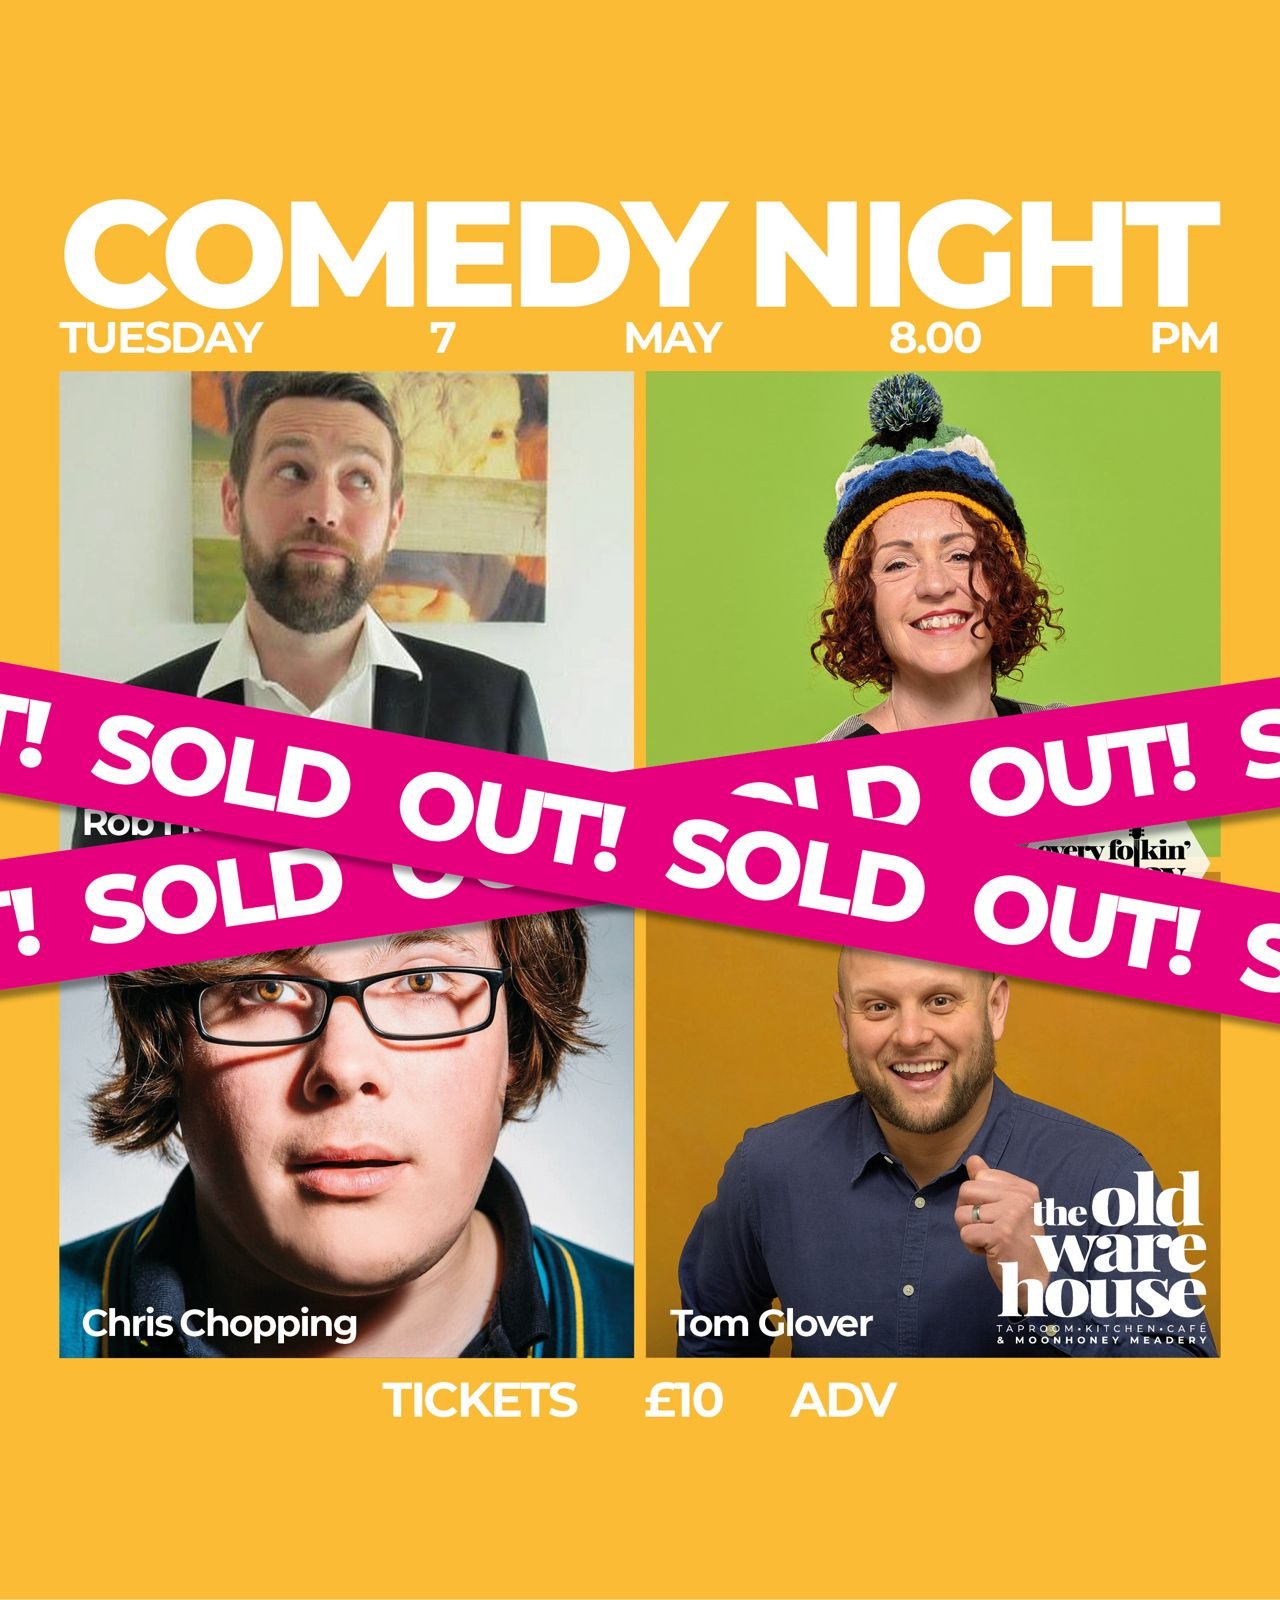 SOLD OUT...SOLD OUT...SOLD OUT!

Well, don't say we didn't warn you! 

All tickets are now SOLD for our 3rd 'Comedy Night' on Tuesday 7th May.  We look forward to seeing you then!
.
.

#moonhoney #theoldwarehouse#meadindevon #localproduce #kingsbridg